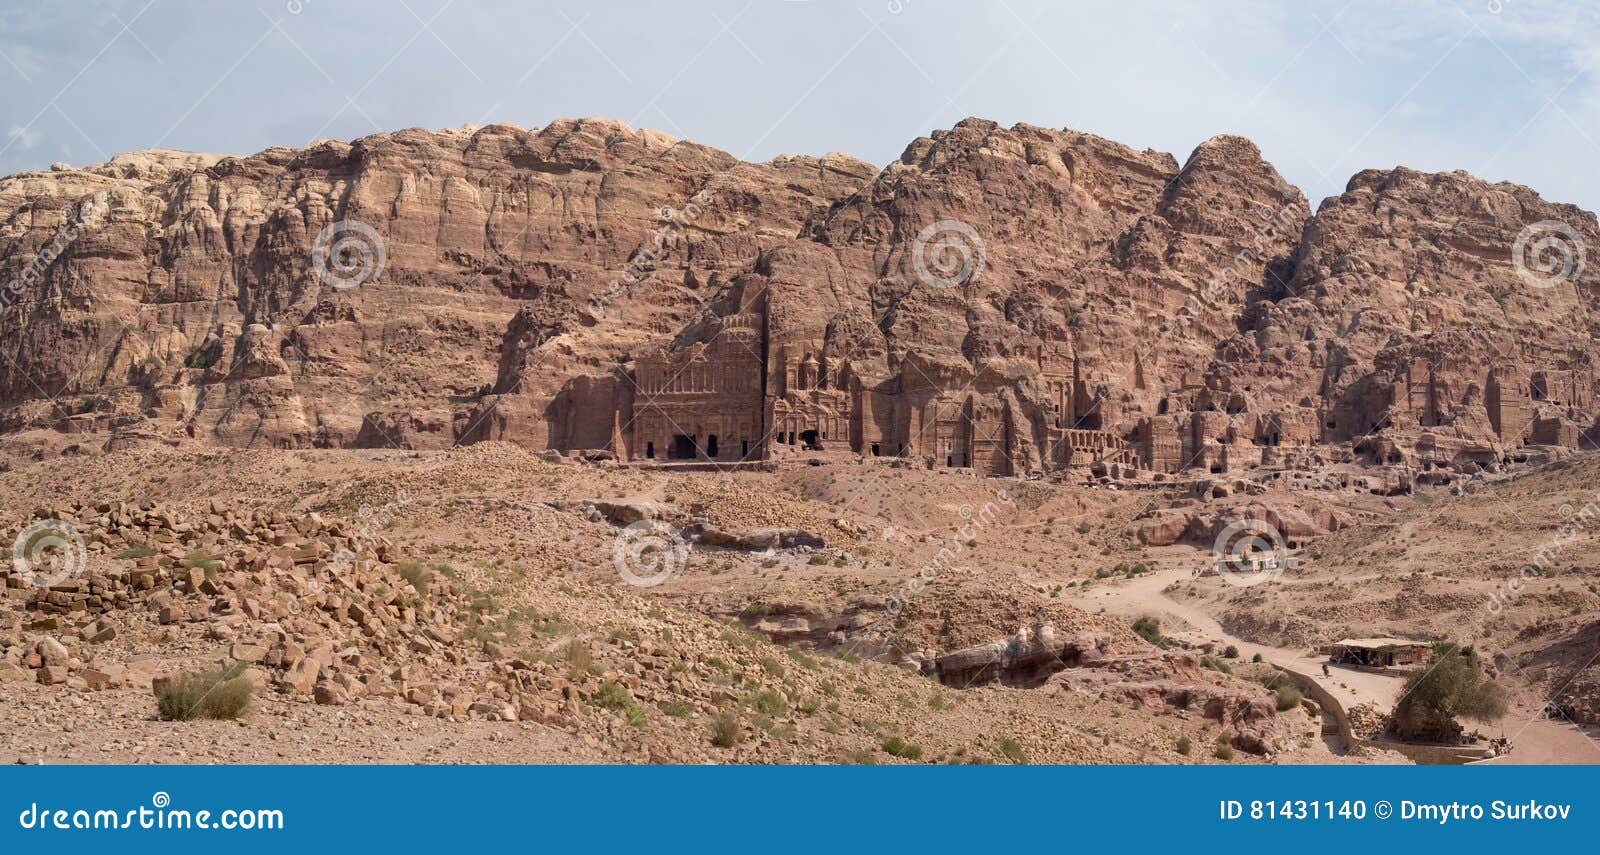 View of the Royal Tombs in Petra. Jordan, Petra. Tombs in the Southern part of the city